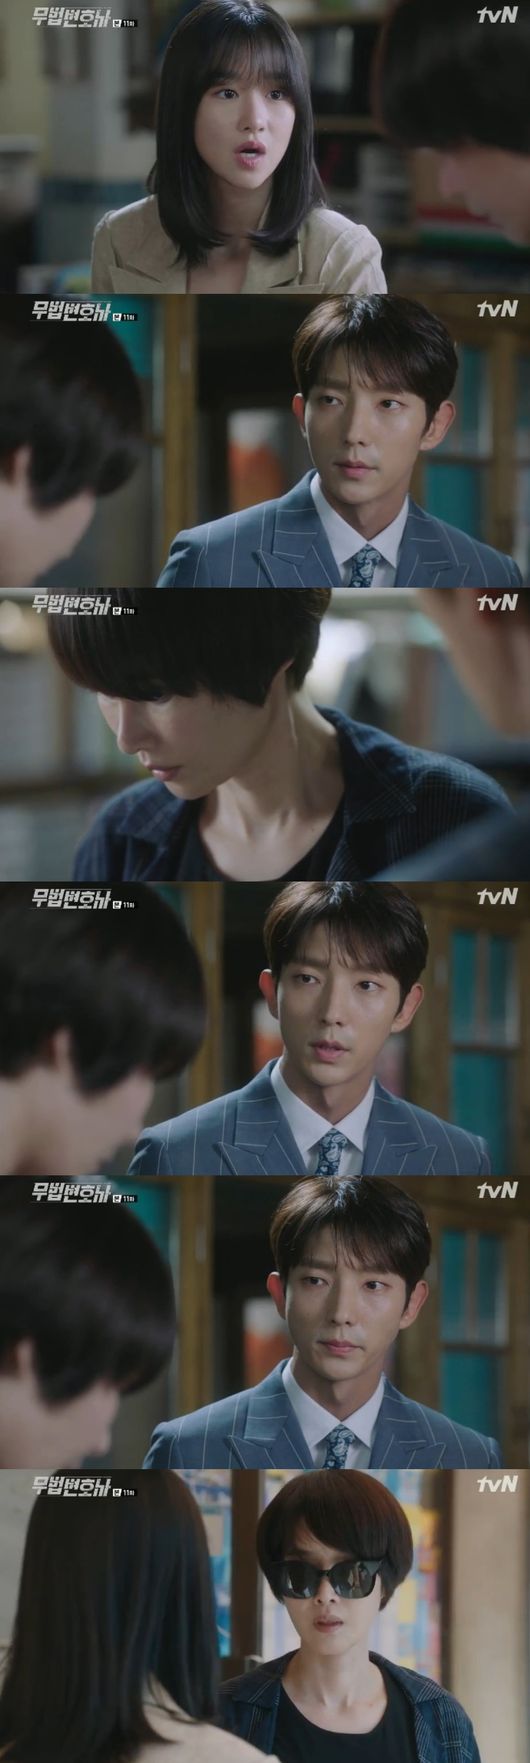 Lee Joon-gi, who learned of the Seo Ye-ji mother, Baek Ju-hee Identity, really break up with Seo Ye-ji as she asked.In the TVN weekend drama Unlawful Lawyer (director Kim Jin-min, playwright Yoon Hyun-ho) broadcast on the 16th, the relationship between Lee Joon-gi and Jae-ji was in crisis.On this day, An Oju appeared as a witness to remove Bong Sang-pils Murder An Innocent Man. Im telling you the mayors name.Earlier, Jae asked Anoju, who contacted him, if he would write Murder An Innocent Man, but he asked if he would confess, but Anoju was a no-commant at the time, so he surprised Jae.He returned his cell phone and asked why he was suggesting it.An-oh said, The embroidery will be dangerous. He smiled meaningfully. Jae-yi asked what he wanted, and An-oh said, I will know when the trial is over.But unlike worry, I do not take off An Innocent Man coolly.He apologized to Sang-pil for his loss and said he was here to seek a good cause for his superiors to the bodyguard who would be legally responsible.I want forgiveness, he said, and he bowed his head on the spot.Taking off An Innocent Man, Sang-pil, who was found not guilty, asked Jay if he had traded with An-o-ju because of him.Jae-yi said, The interests of each other were right. He asked for the appeal, and Sang-pil smiled silently.Sangpil said, I do not know if I can keep it difficult to do this.Looking at the reason for the split with Cha Mun-suk, he declared that he would attack Cha Mun-suk next.Do not do that, kill me here, said An-oh. I will do my revenge by law.Then An-oh said, I still can not get my mind back. There is another law on the law that Sang-pil thinks.The day will come when you say the law will collapse, Sangpil warned, There will be no law to hang around the ashes.Hyun-joo (Baek Ju-hee) was called by Cha Moon-sook and hurried to work. Cha Moon-sook kept looking at such a prefecture, watching it.There was a bloody aura as if he knew the Identity of the present.Hyun-joo visited Jae-yi and said that Cha Moon-sook was in the process of having an important meeting. At that time, Sang-pil arrived at the office and three people came across.Sangpil asked about his relationship with his uncle, Choi Woong. Hyunju said he had come to Jae-yi for a lot of help, and Sang-pil said, Then I should have come first.Eventually, Hyunju ran away, and Jae-yi grabbed such a prefecture and calmed his mind.Sang-pil went out with Jae-yi. Jae-yi asked him to believe Hyun-joos words, and Sang-pil said, I know you believe, but your safety is more important to me.Hyun-joo met with Sang-pil, who thanked him for giving him a picture of Cha Moon-suk but said he would not be helped anymore.He was worried that he believed in the current state, and asked him not to see him anymore.Tears pooled in his eyes.Hyunju told Sang-pil, Thank you, for protecting my daughter in the meantime, and revealed his identity. Then he remembered Hyun-joos face, which shouted Go quickly to him in his childhood memory.Sangpil said, What did you say now? He re-confirmed, and asked if Jay was a real daughter.However, How do you believe that? He said, How do you believe that? Hyunju conveyed the connection of the circumstances, and Sangpil said, Is it really Jaes mother? He did not believe that Hyunju, who saved himself 18 years ago, was in front of his eyes.Hyunju said, I was very good like my mother. Then, when I came back, my husband and Jae became dangerous, so I kept it secret.He asked me to hide Identity, saying he needed time before he told him himself.I have protected Jae-yi so far, but how long can my daughter be safe? He said, If you really love my daughter, let her go, I do not want to lose her again.The chalk was silent and shed tears.Sang-pil recalled Jae-yi, who had been exposed to danger several times because of himself.The next day, Jae-il, who called Jae-yi, taught Spartan exercise as if to teach self-defense, saying, I will teach you every time I have time, so that I can do well alone in the future.He asked what he meant by saying that he could do it alone. He didnt answer.Unbeknownst to her, she had only a moment of heartbreak and pleasure in learning about the Identity of her mother, Hyun-joo, because she had to hide her mothers existence for her, as well as leave for her.I have been keeping the safety of Jay so far, so I have been more troubled.Indeed, Sangpil is already sick of the viewers who watch whether he will give up Jae-yi as asked by Hyun-joo, Jae-yis mother.Unlawful Lawyer Broadcast Screen Captures